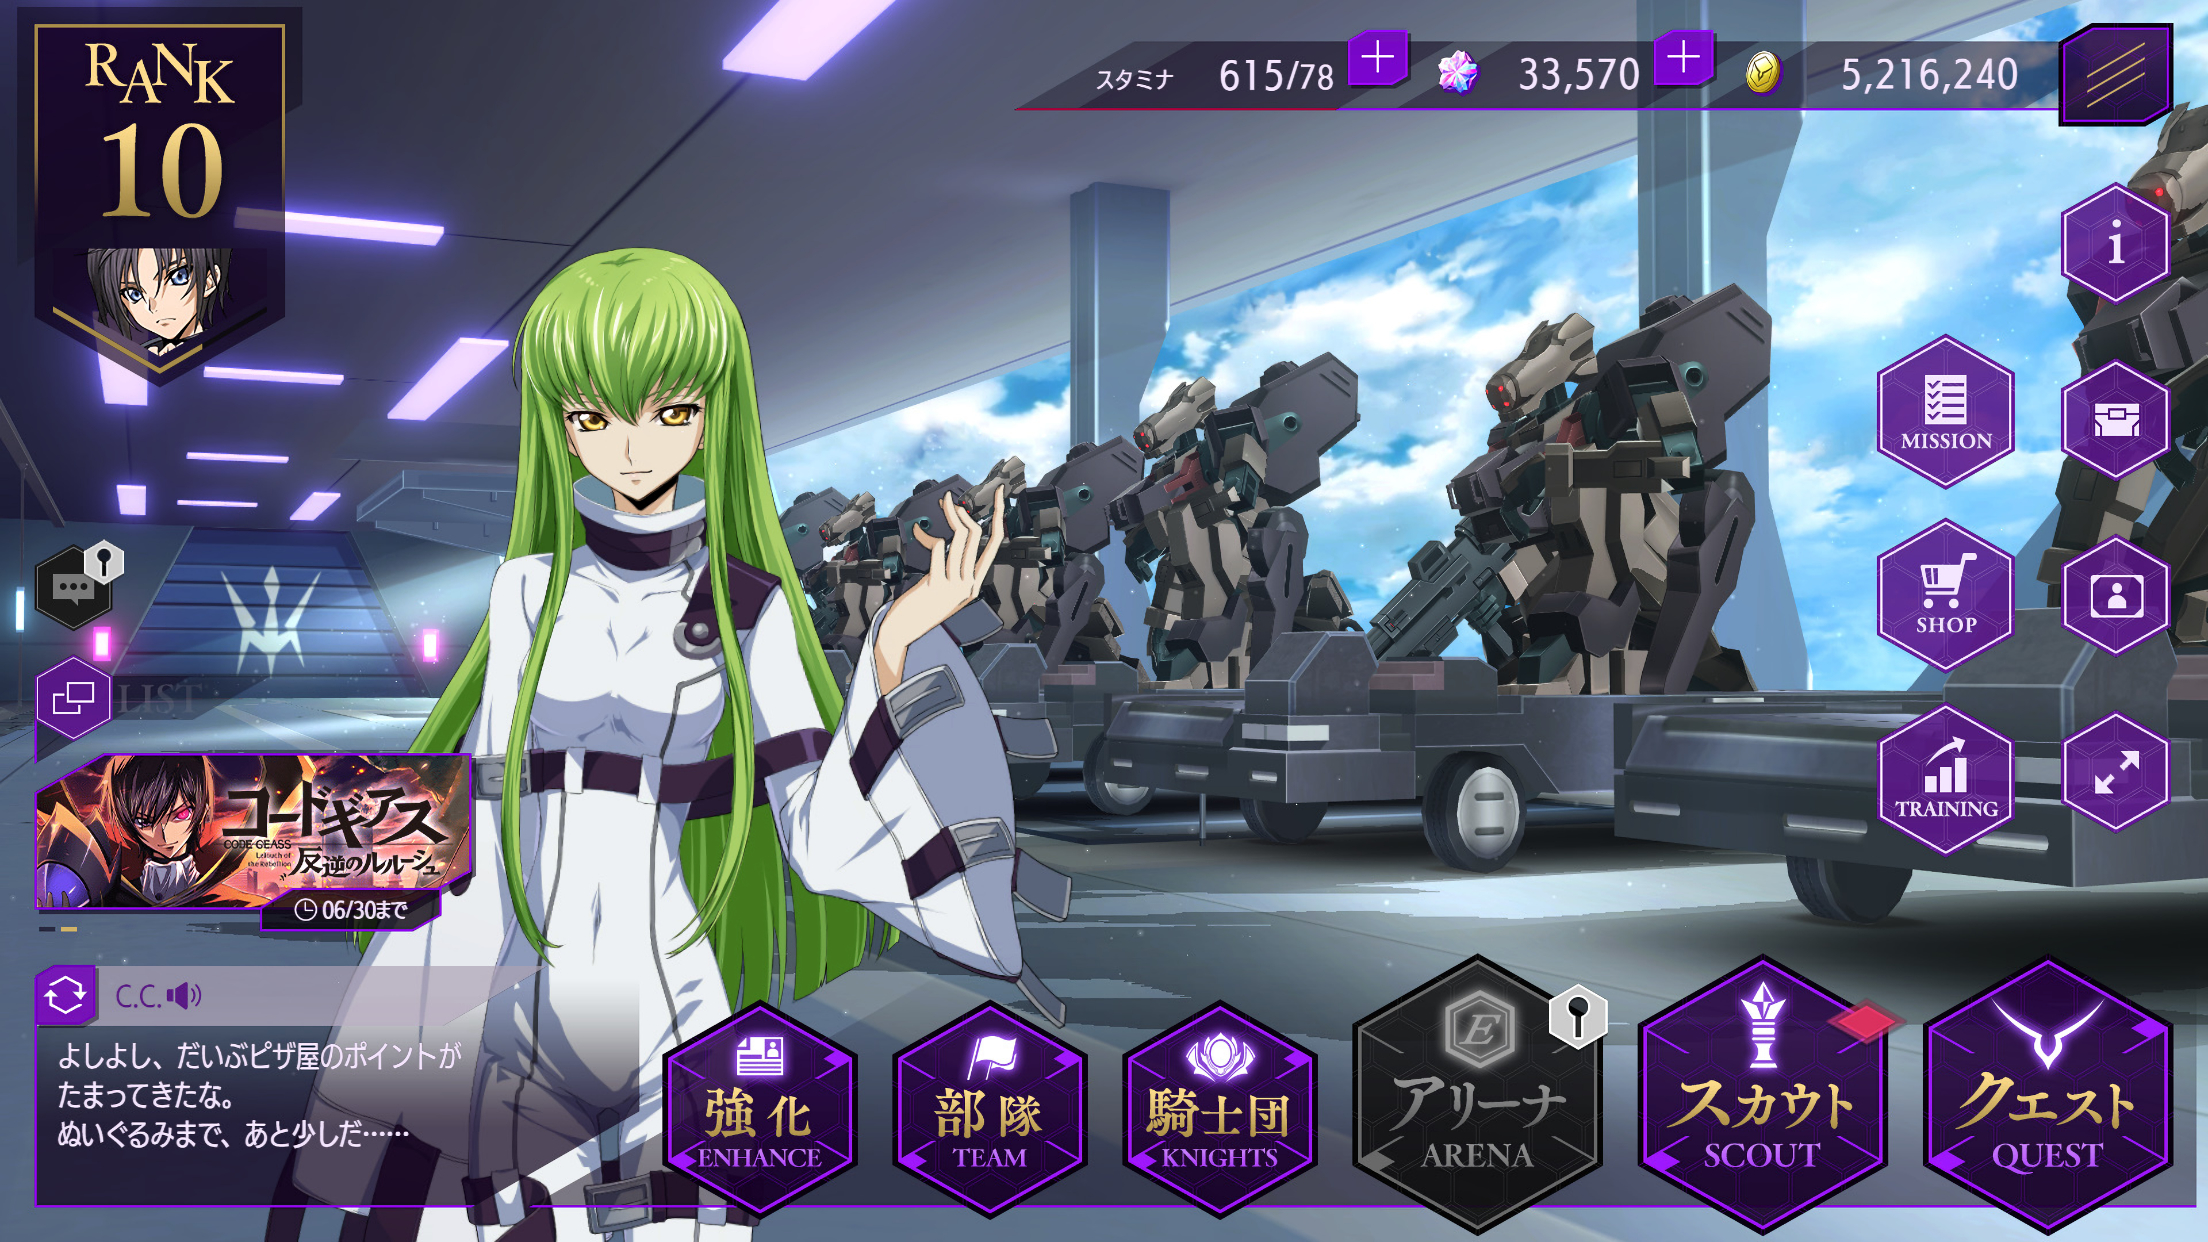 Code Geass: Lost Stories Mobile Game Launches in English - News